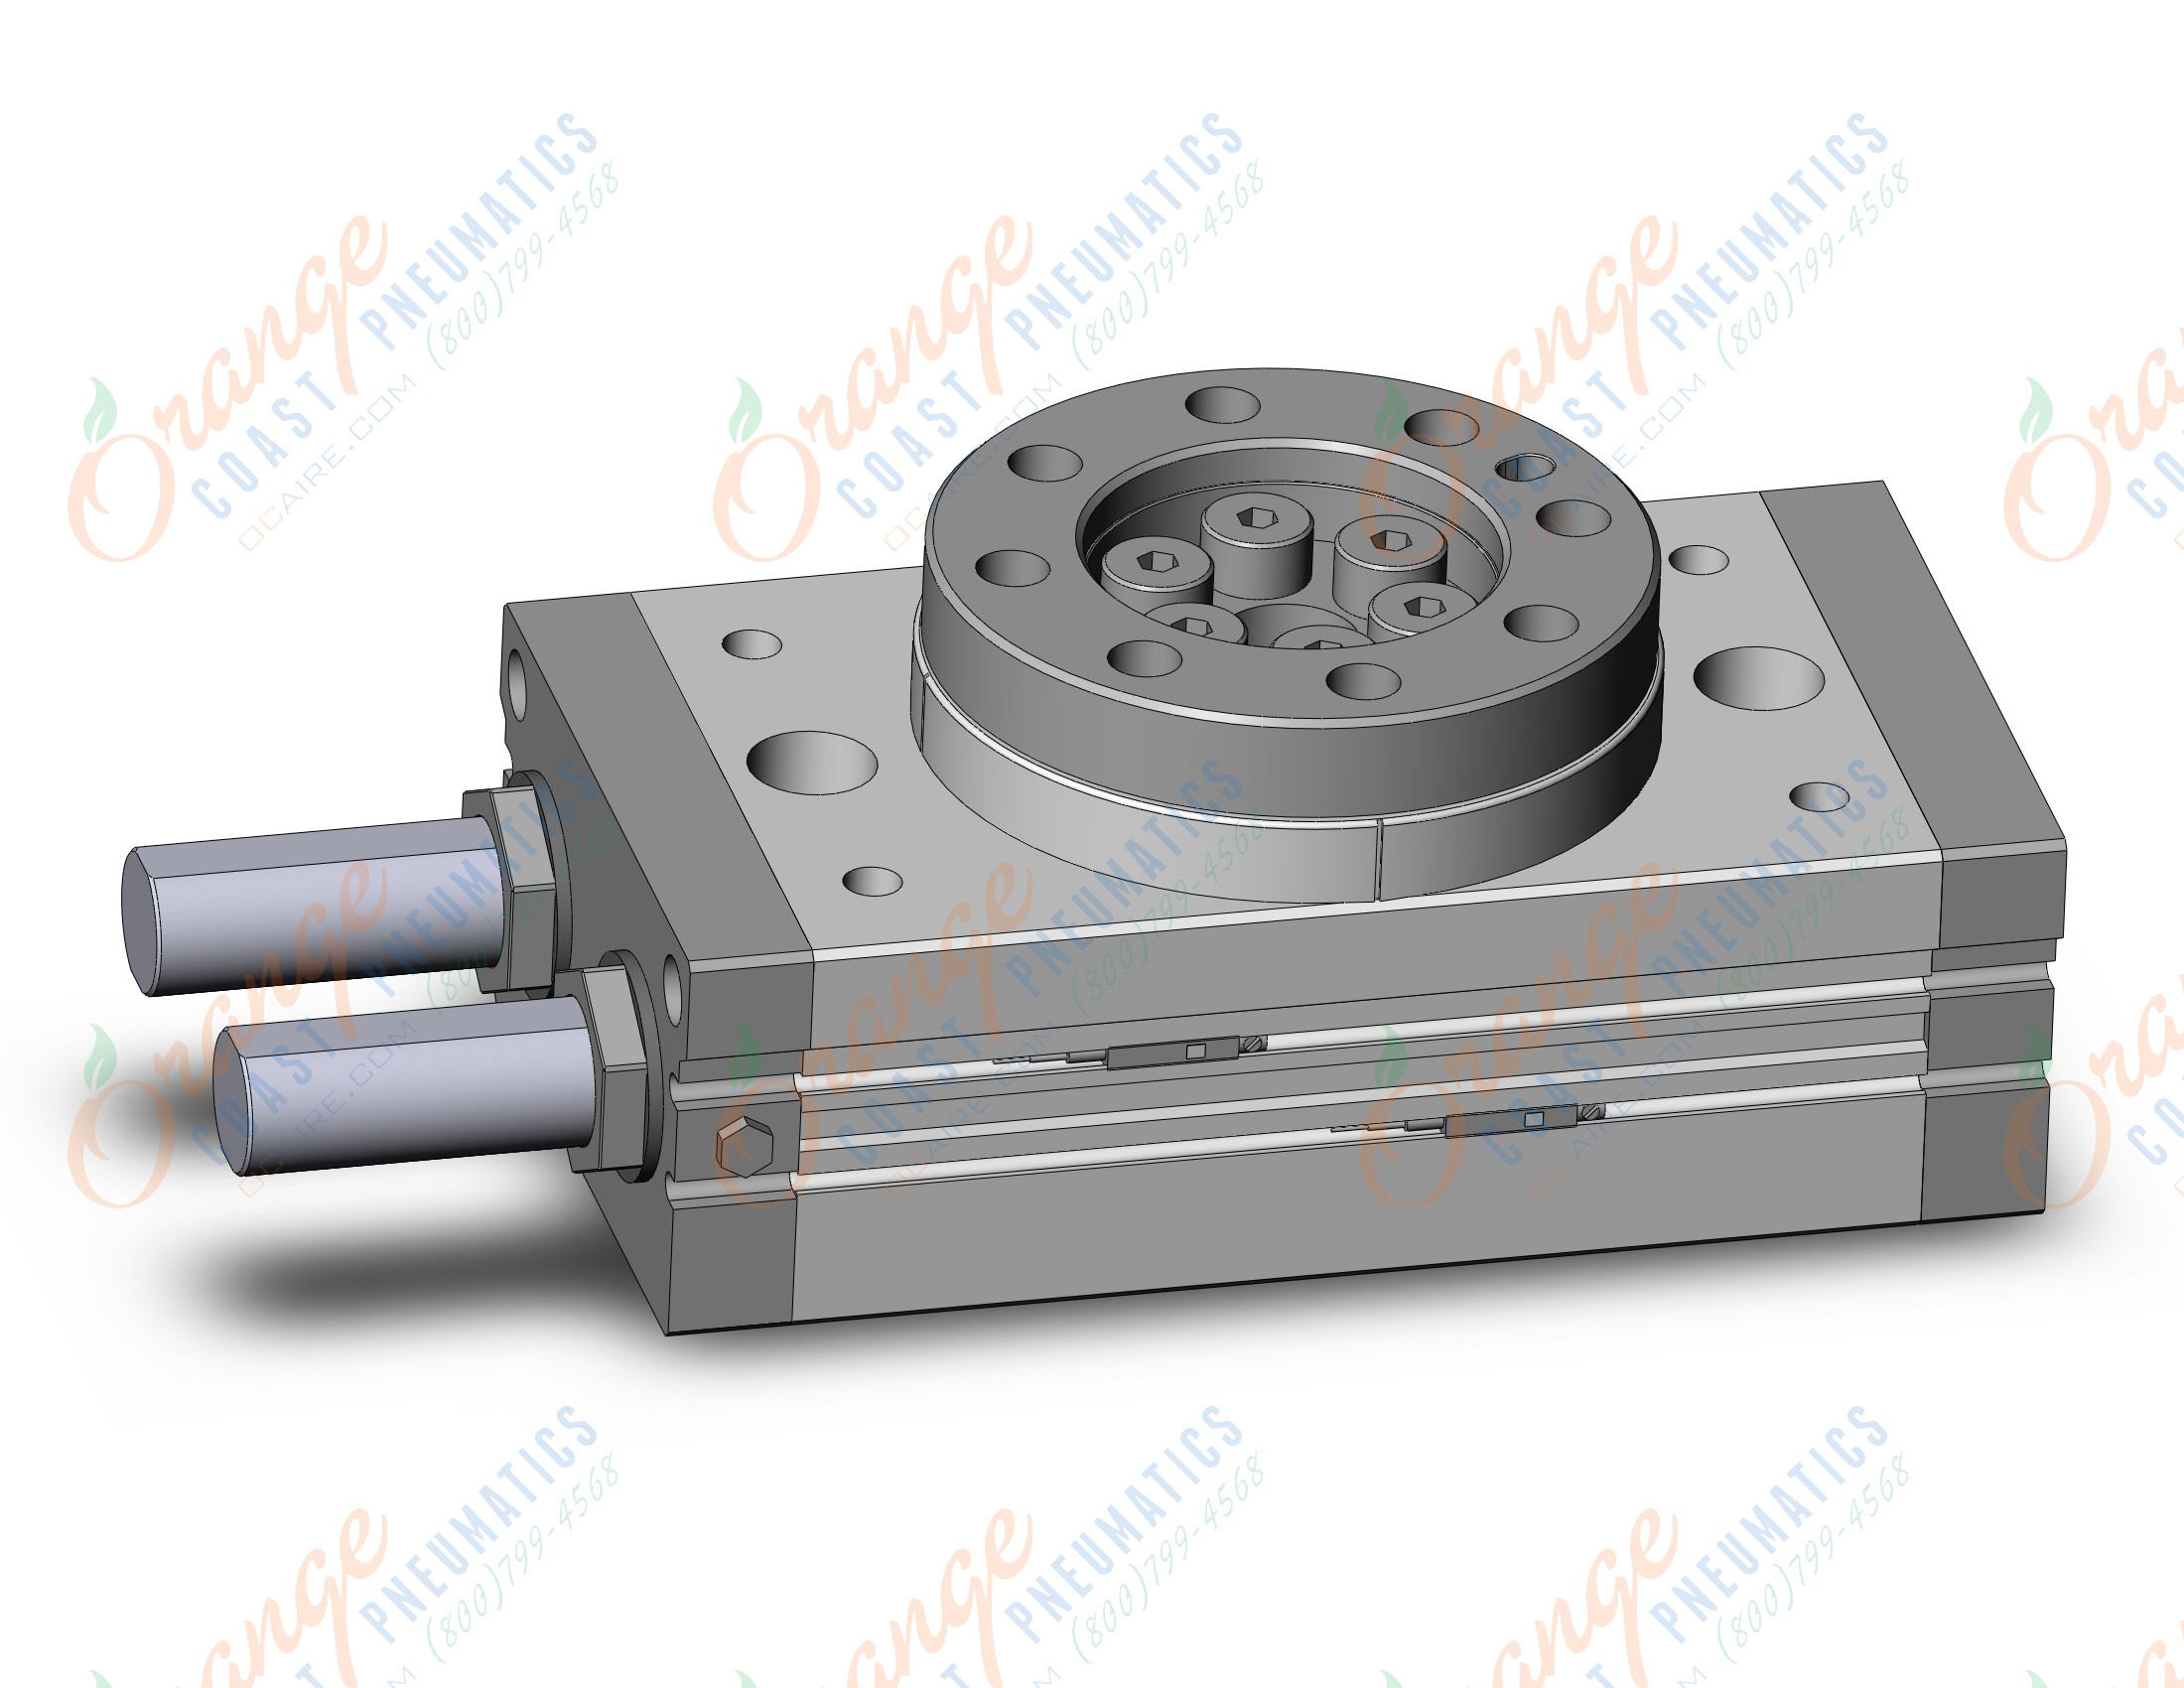 SMC MSQB100R-A93-XF 100mm msq dbl-act auto-sw, MSQ ROTARY ACTUATOR W/TABLE